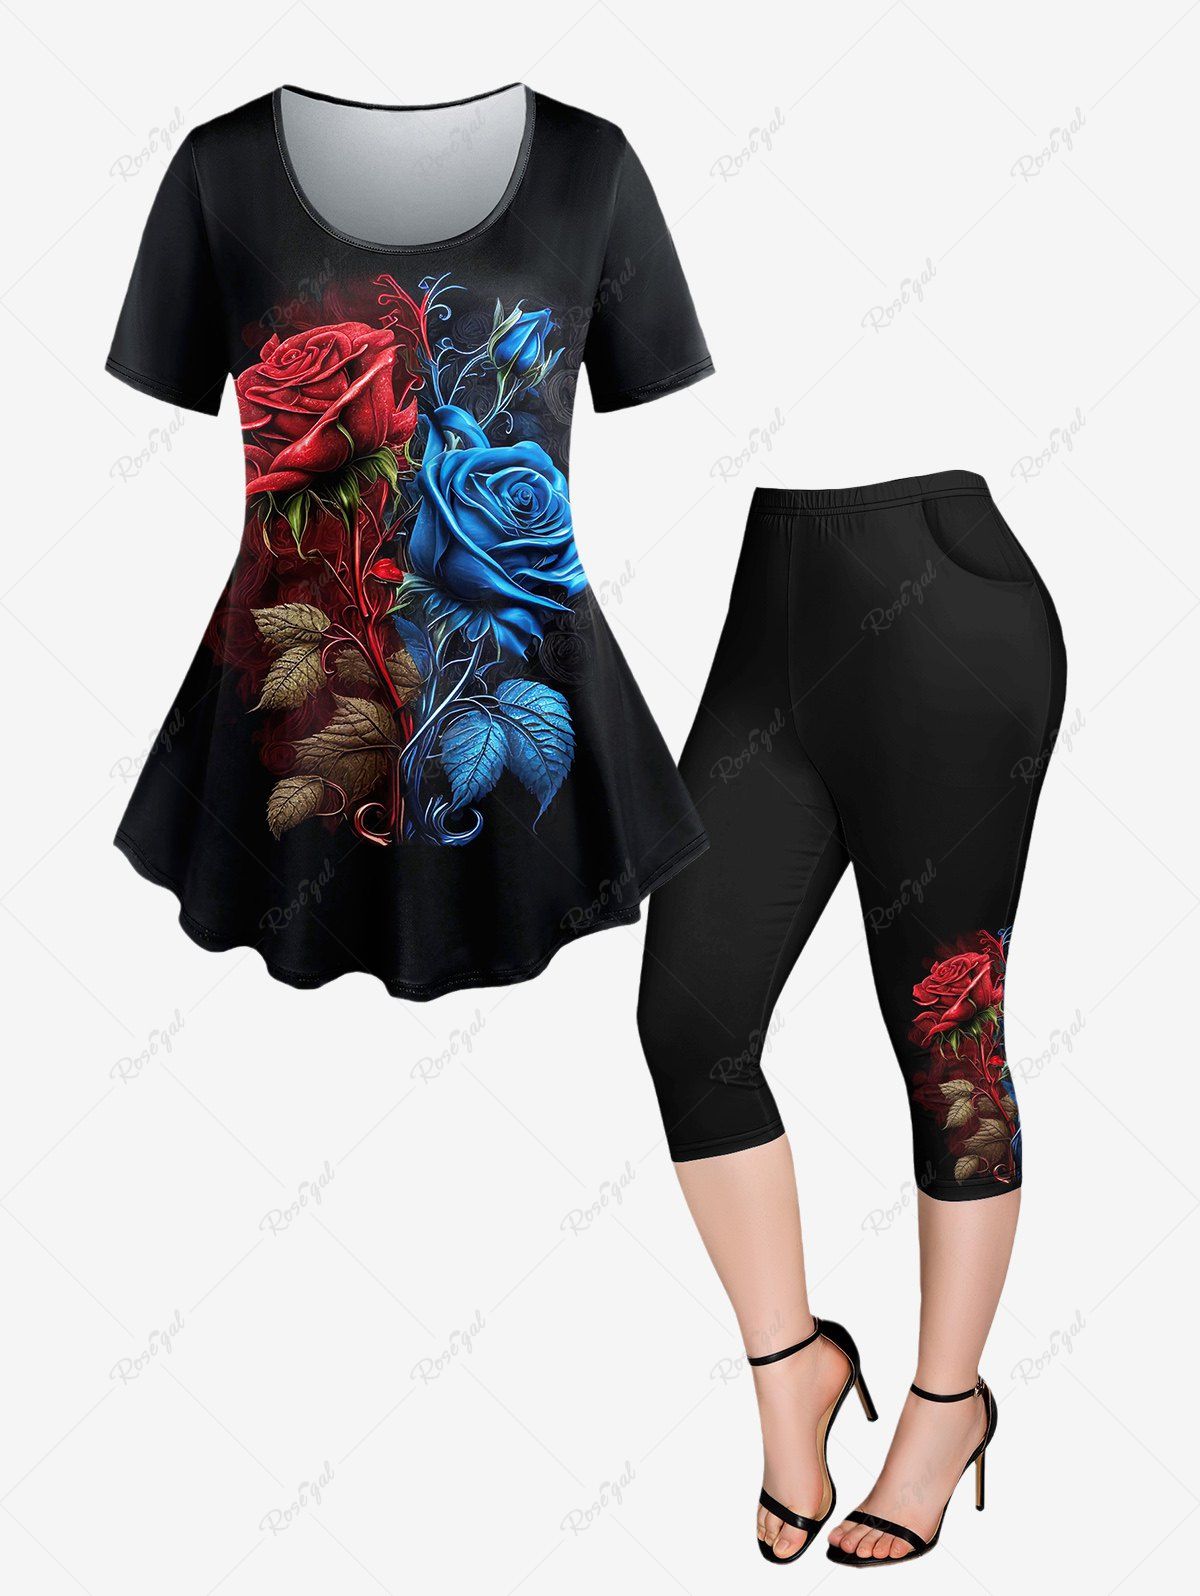 Store Plus Size Flower Leaves Printed Short Sleeves T-shirt and Pockets Capri Leggings Outfit  